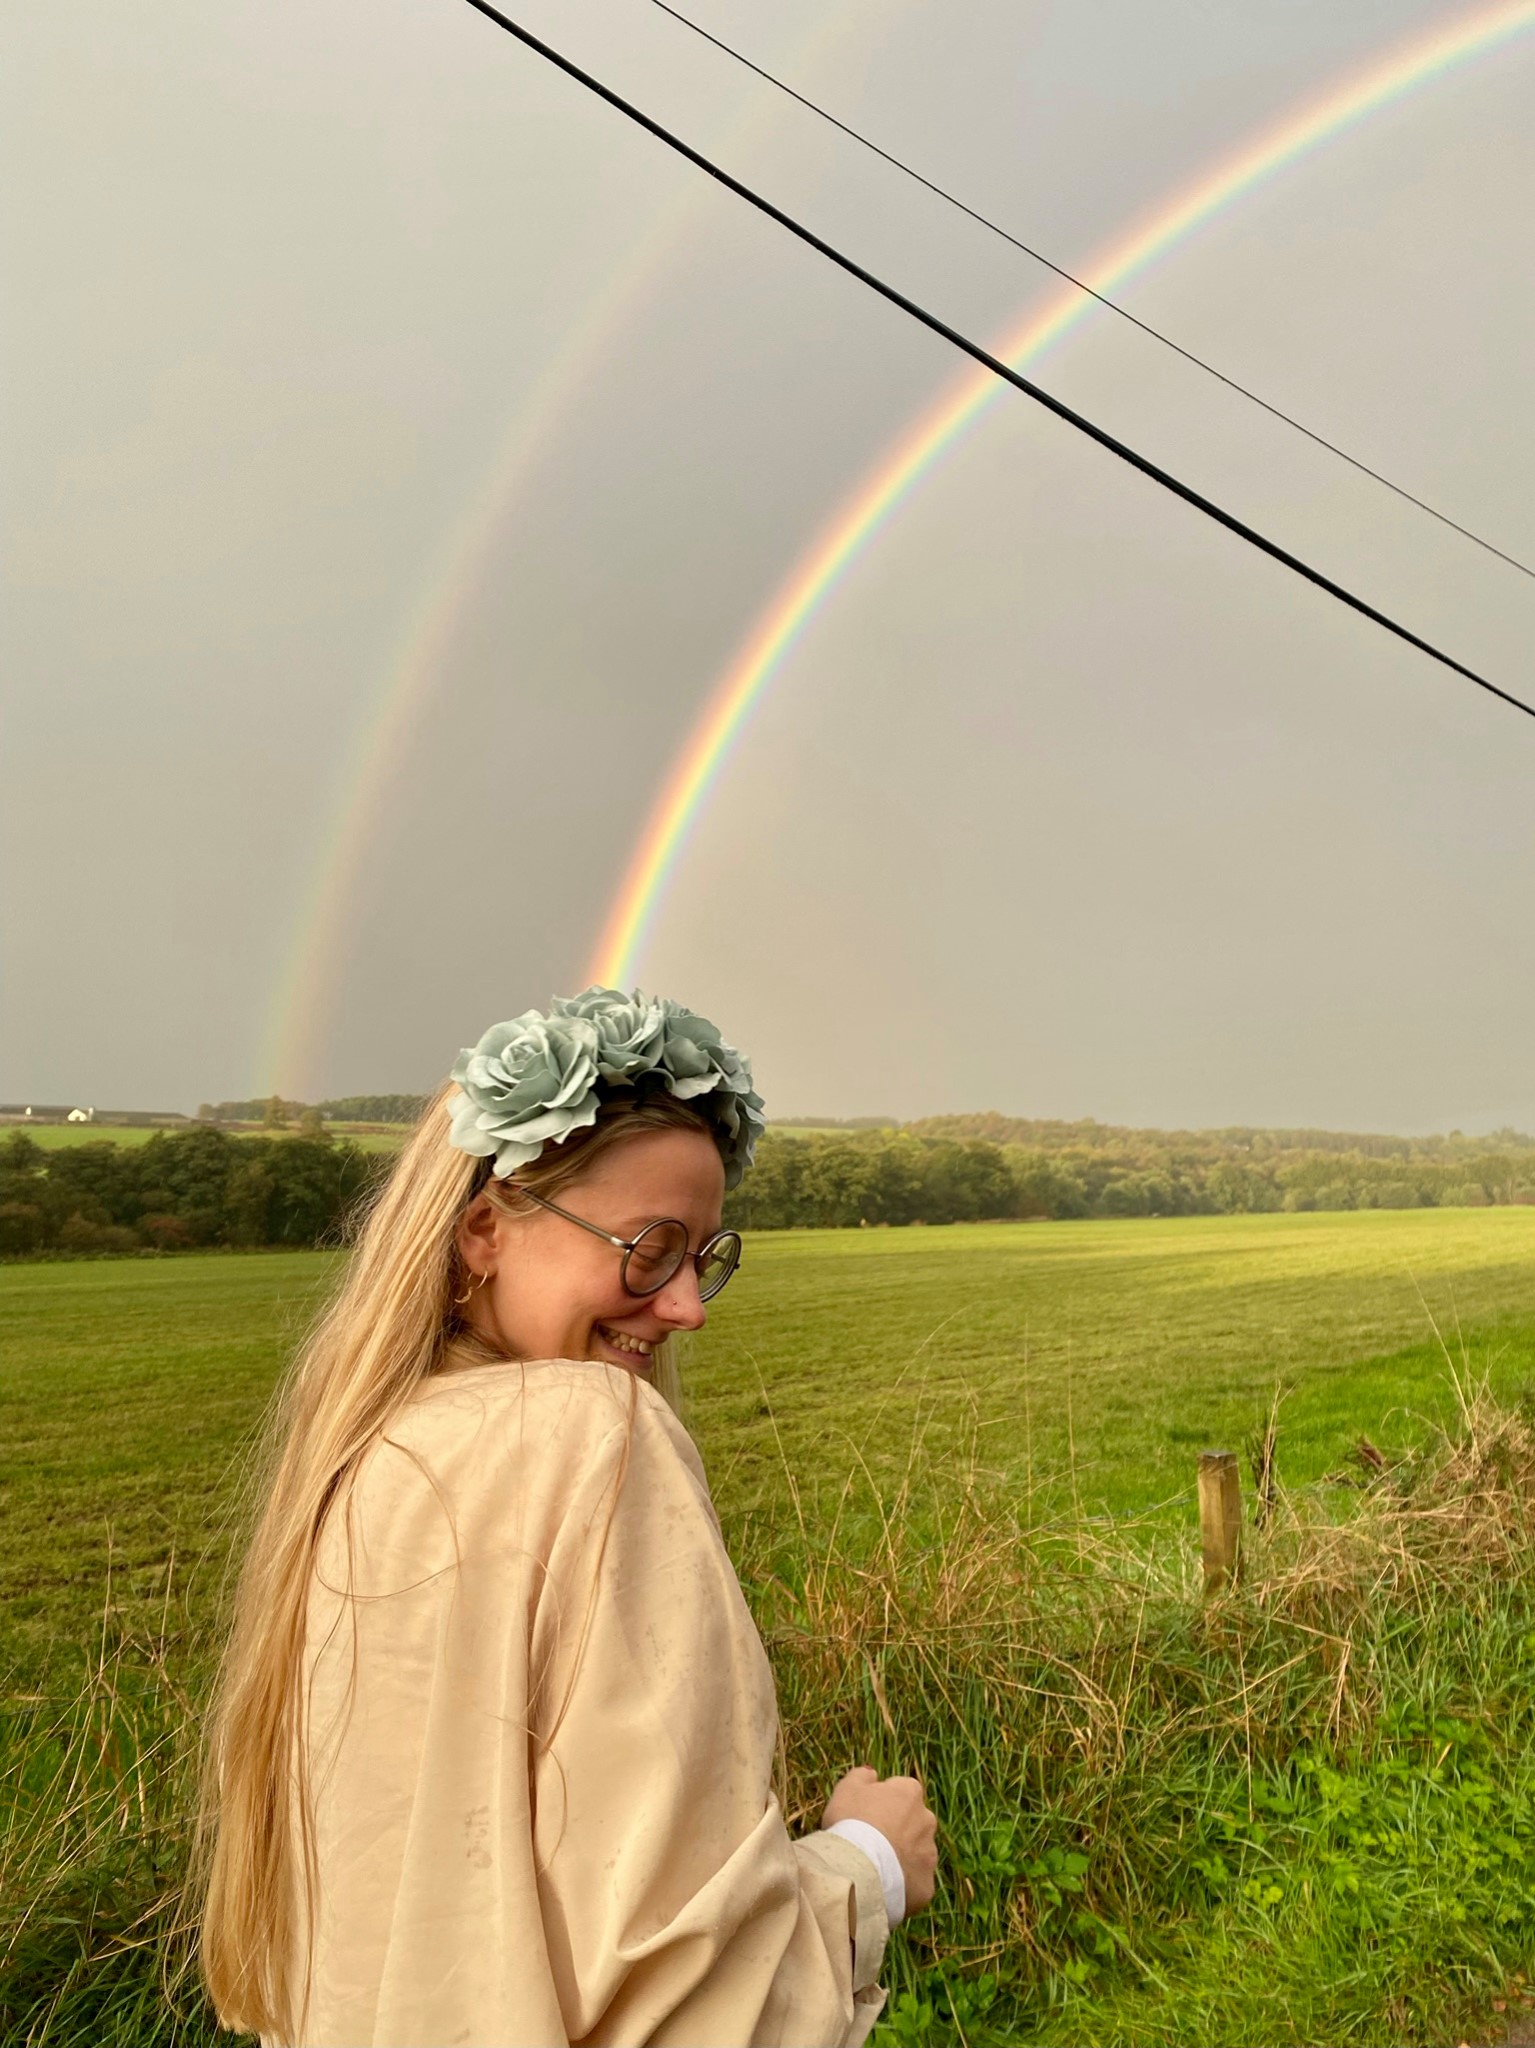 Cat smiles in front of a rainbow, wearing a flower headband and a yellow overshirt